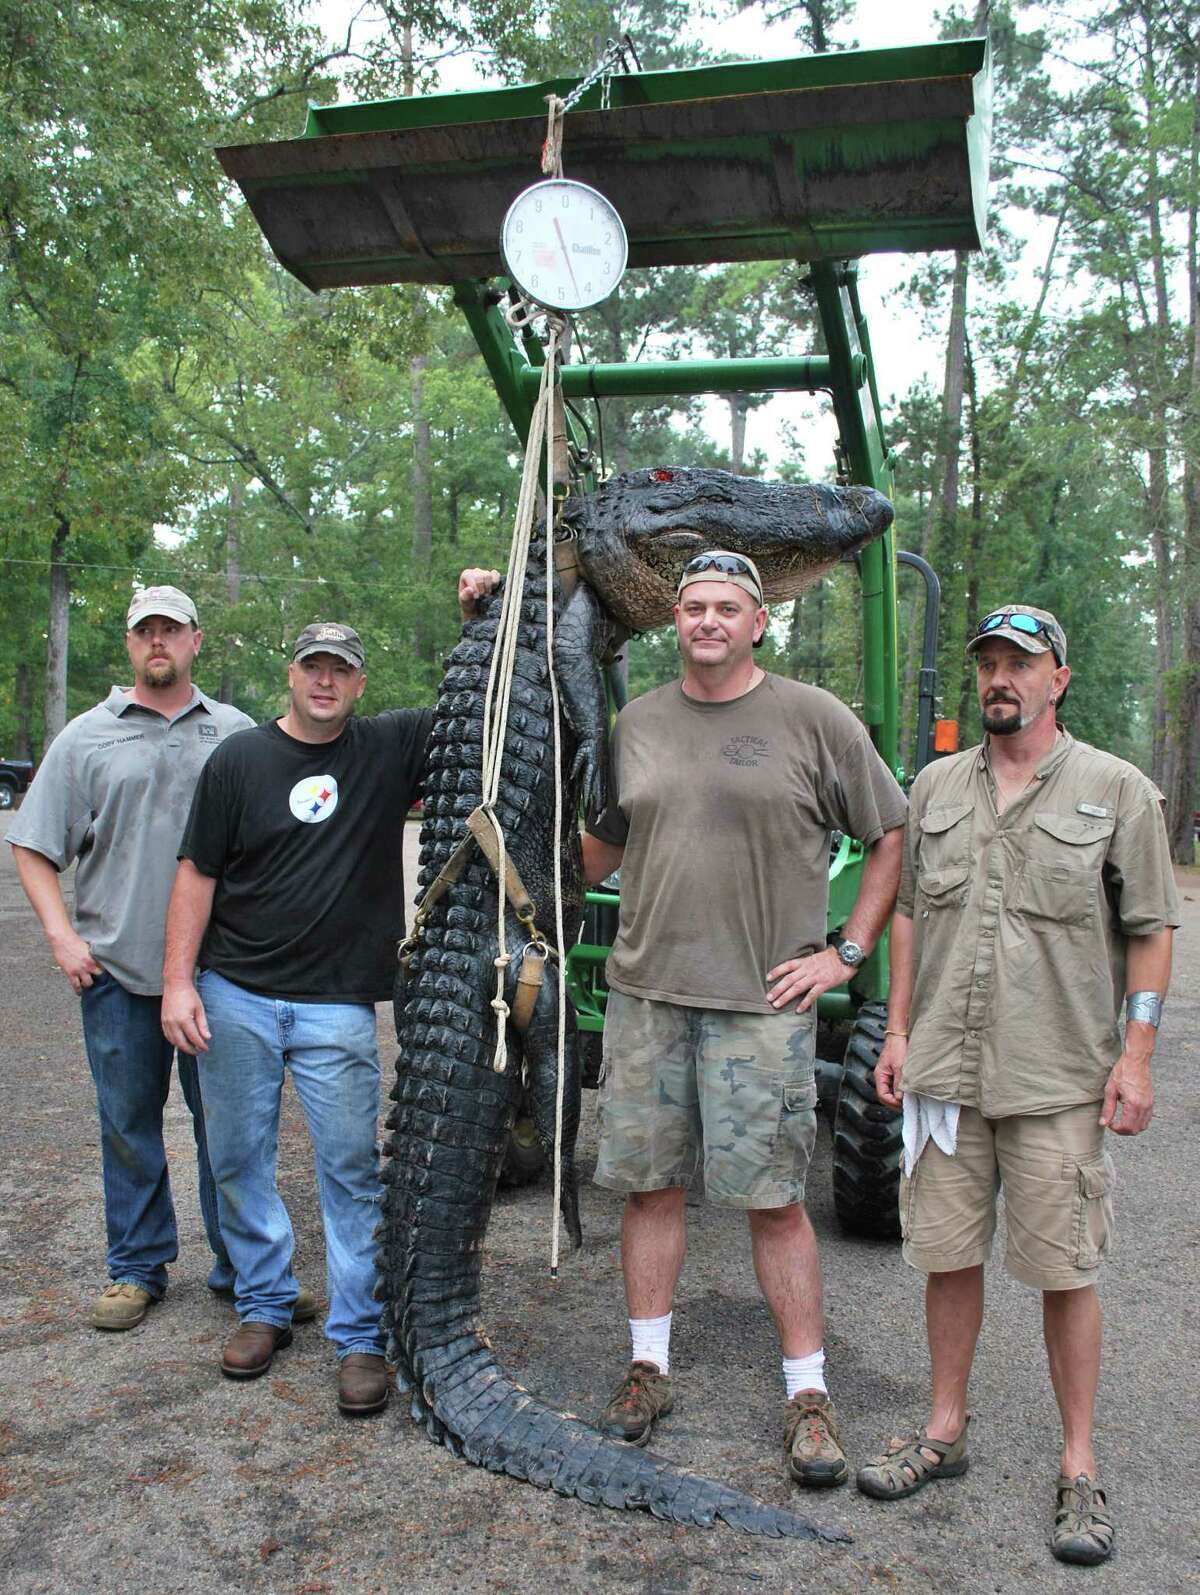 A successful hunt garnering a 12ft 2 inch alligator weighin in at 455 pounds